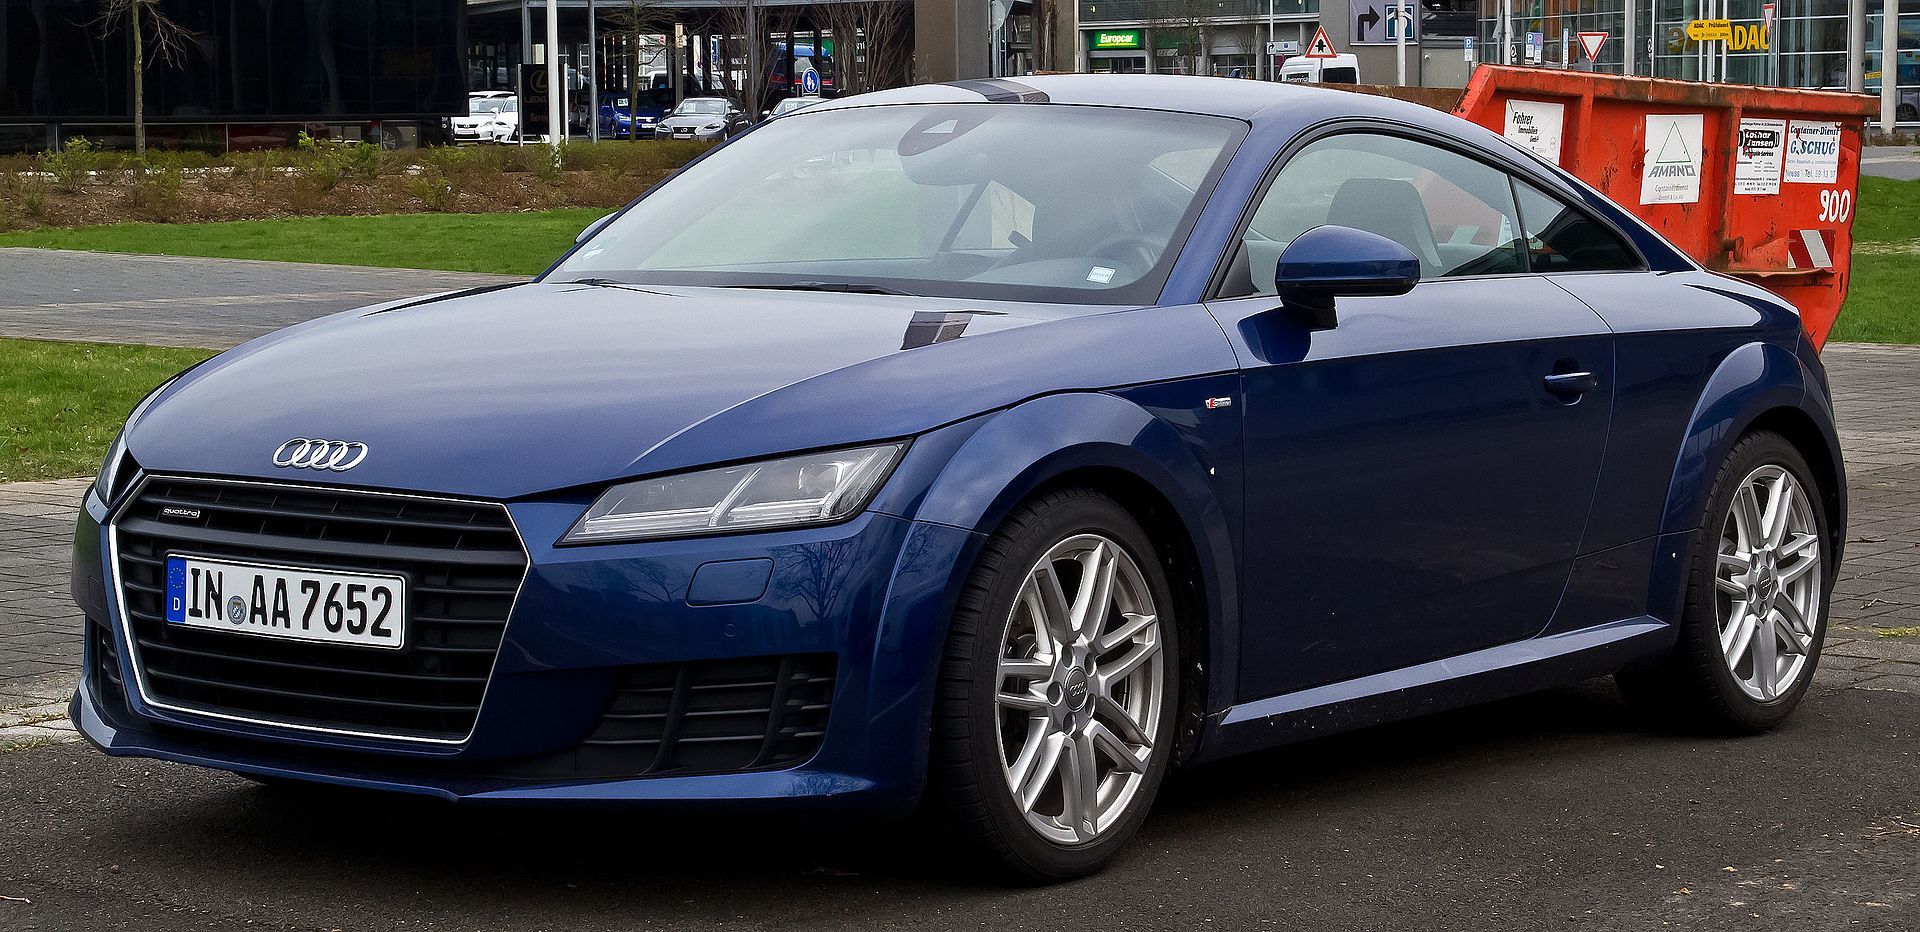 Audi TT Coupe 2.0 Blue front angled view